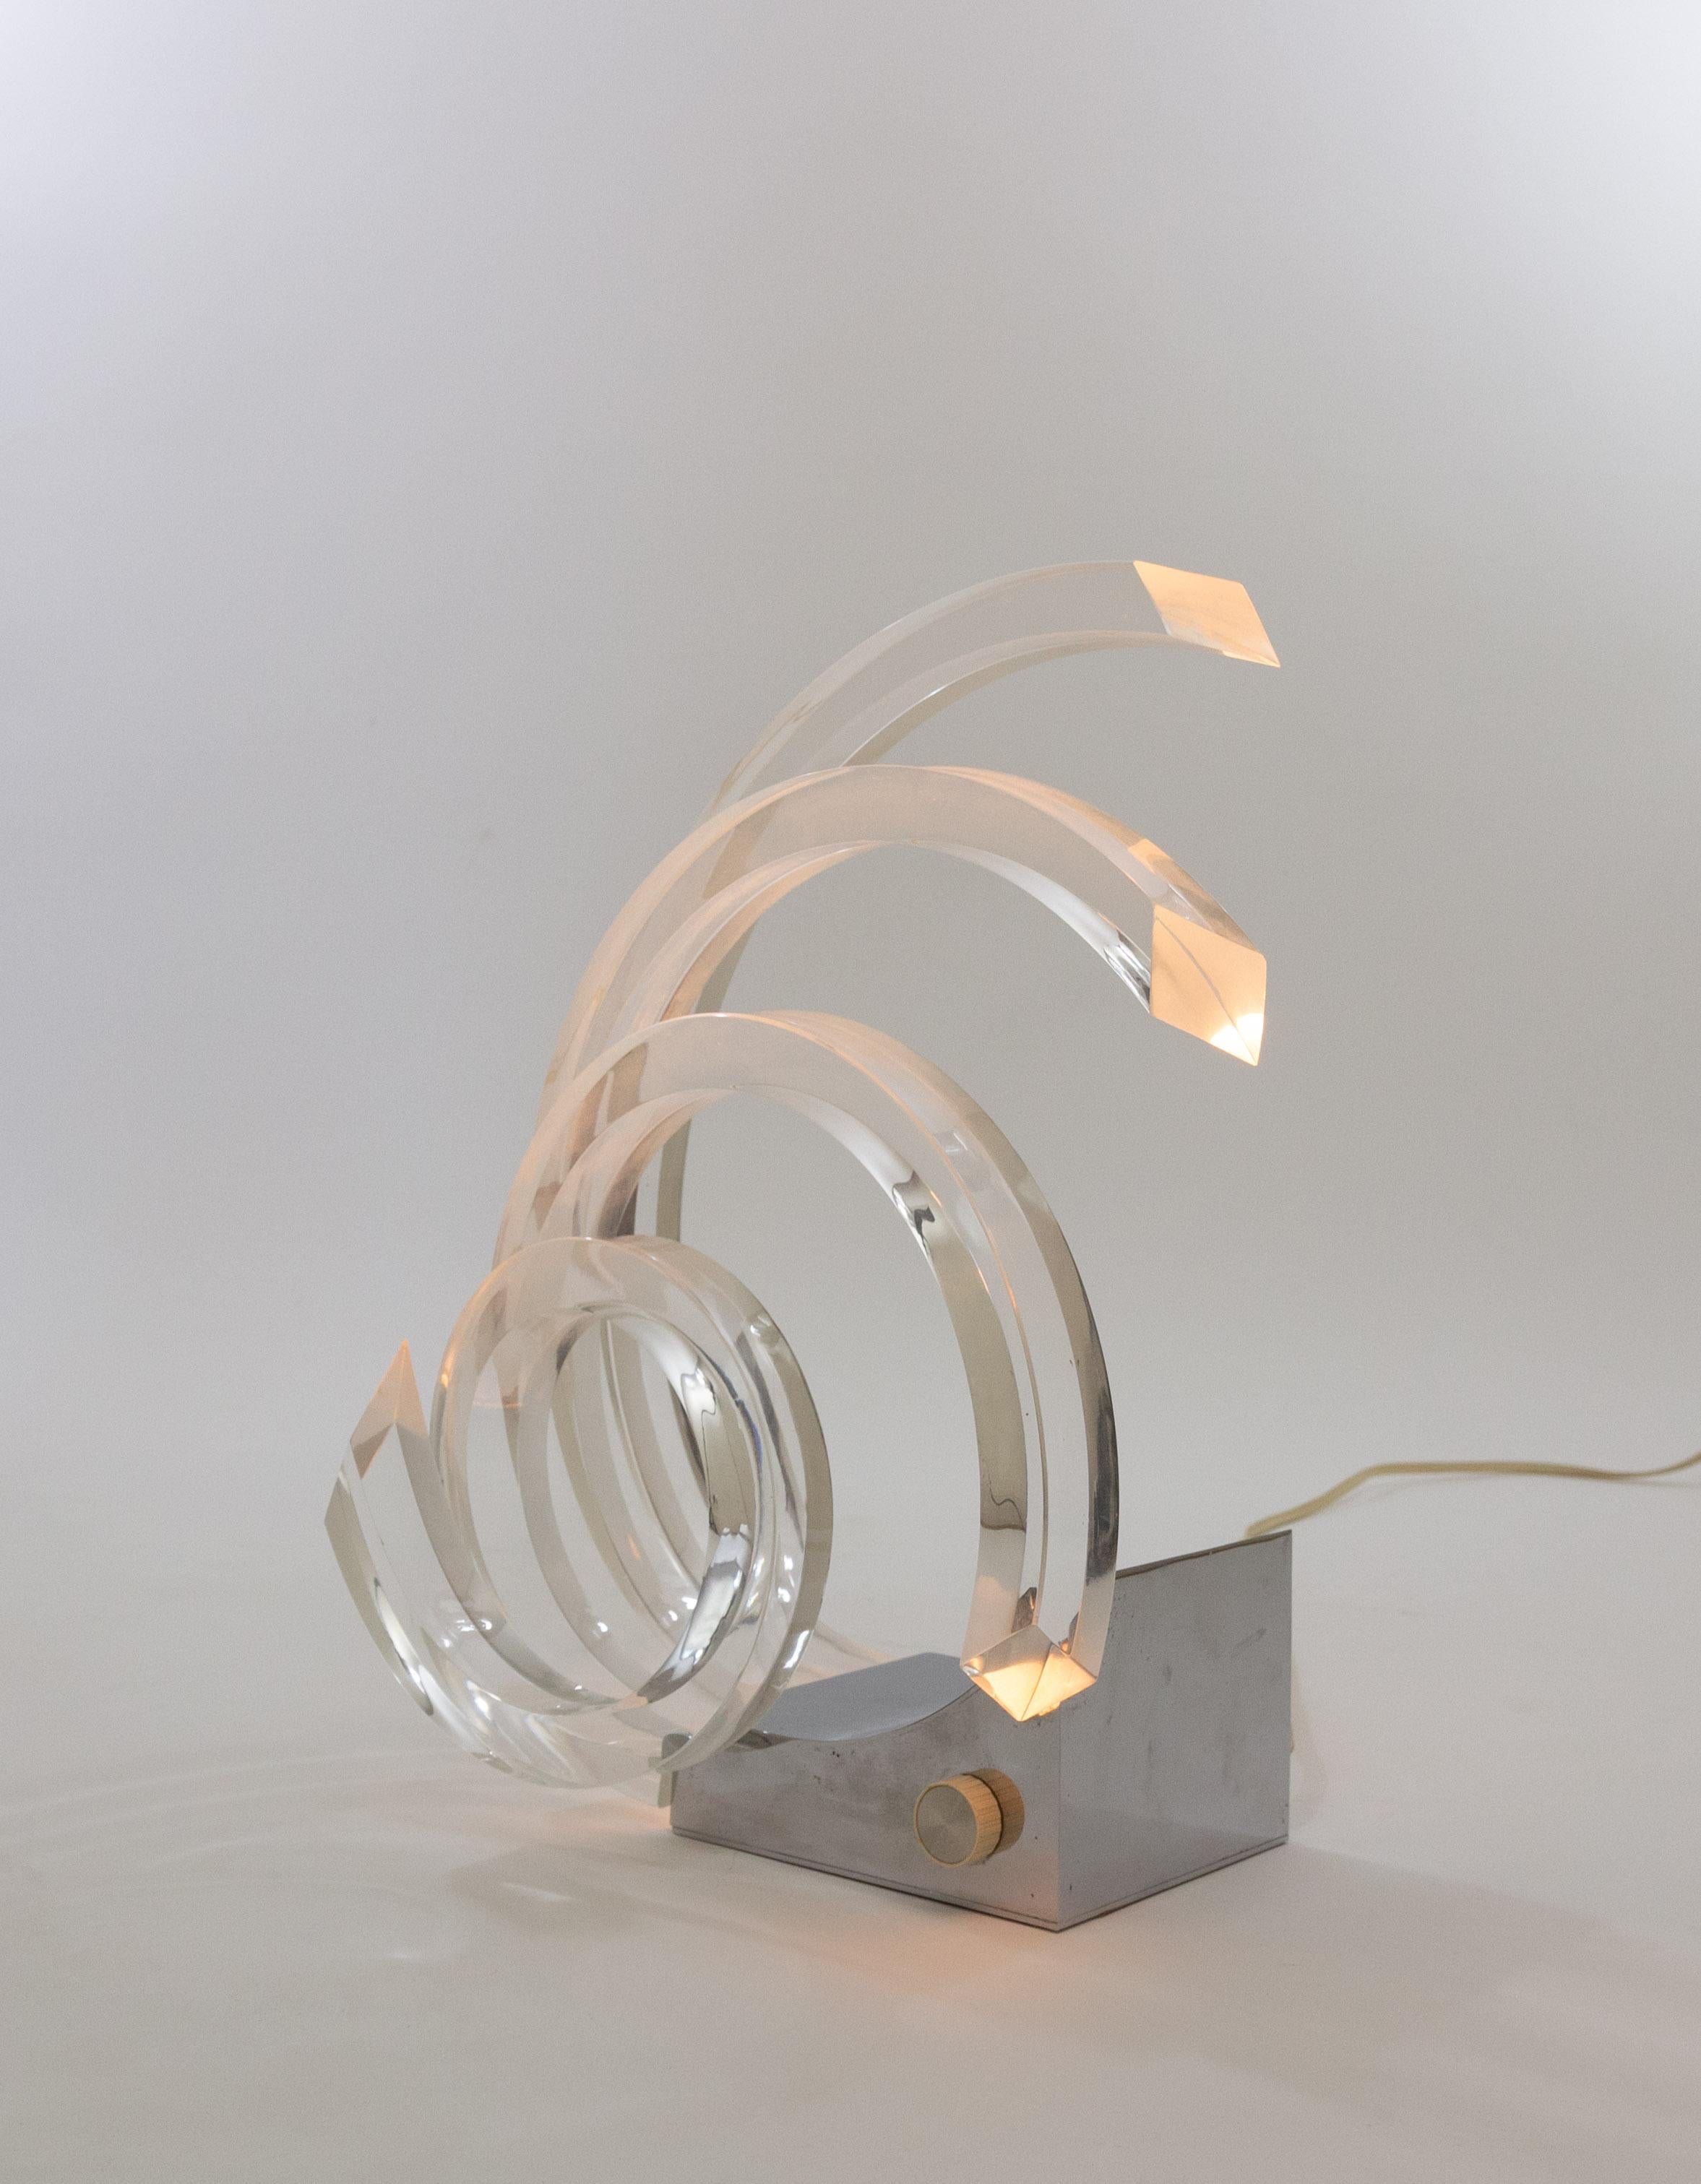 Metal Table lamp by Gaetano Missaglia for Missaglia, 1970s For Sale